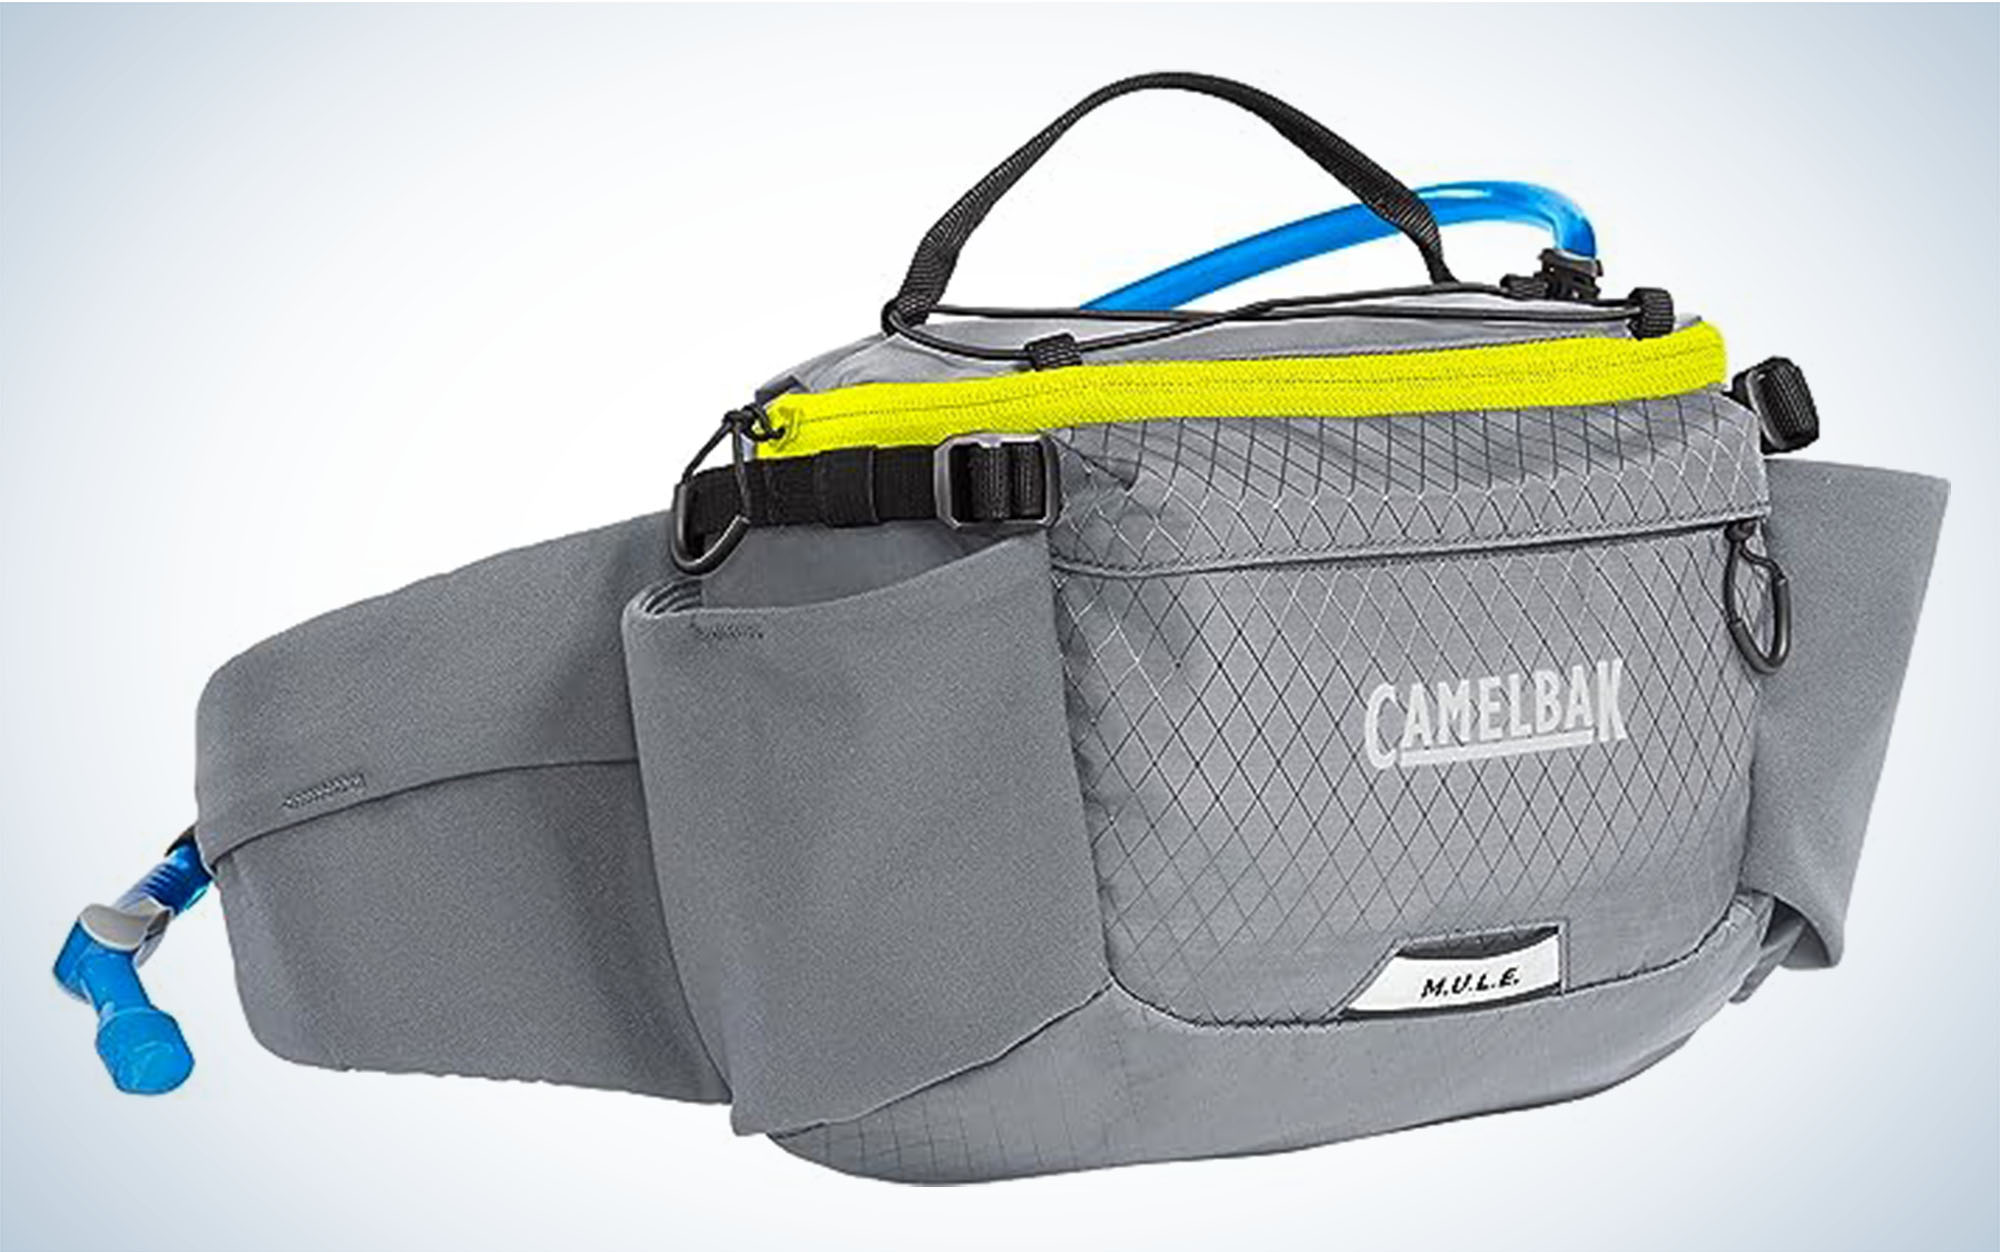 The Camelbak M.U.L.E. 5 Waist Pack is best for hydration.